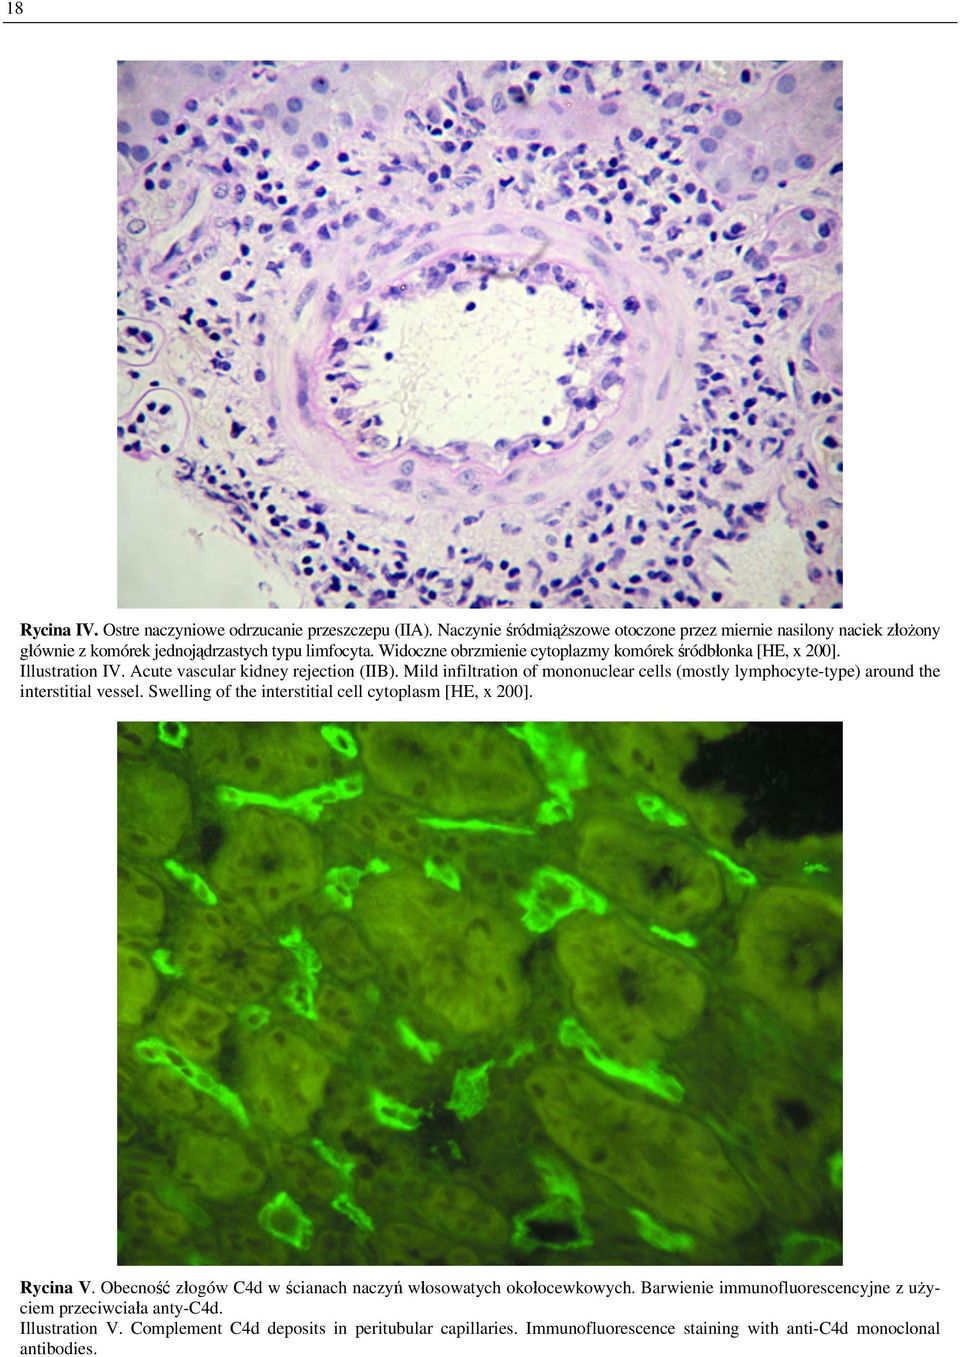 Mild infiltration of mononuclear cells (mostly lymphocyte-type) around the interstitial vessel. Swelling of the interstitial cell cytoplasm [HE, x 200]. Rycina V.